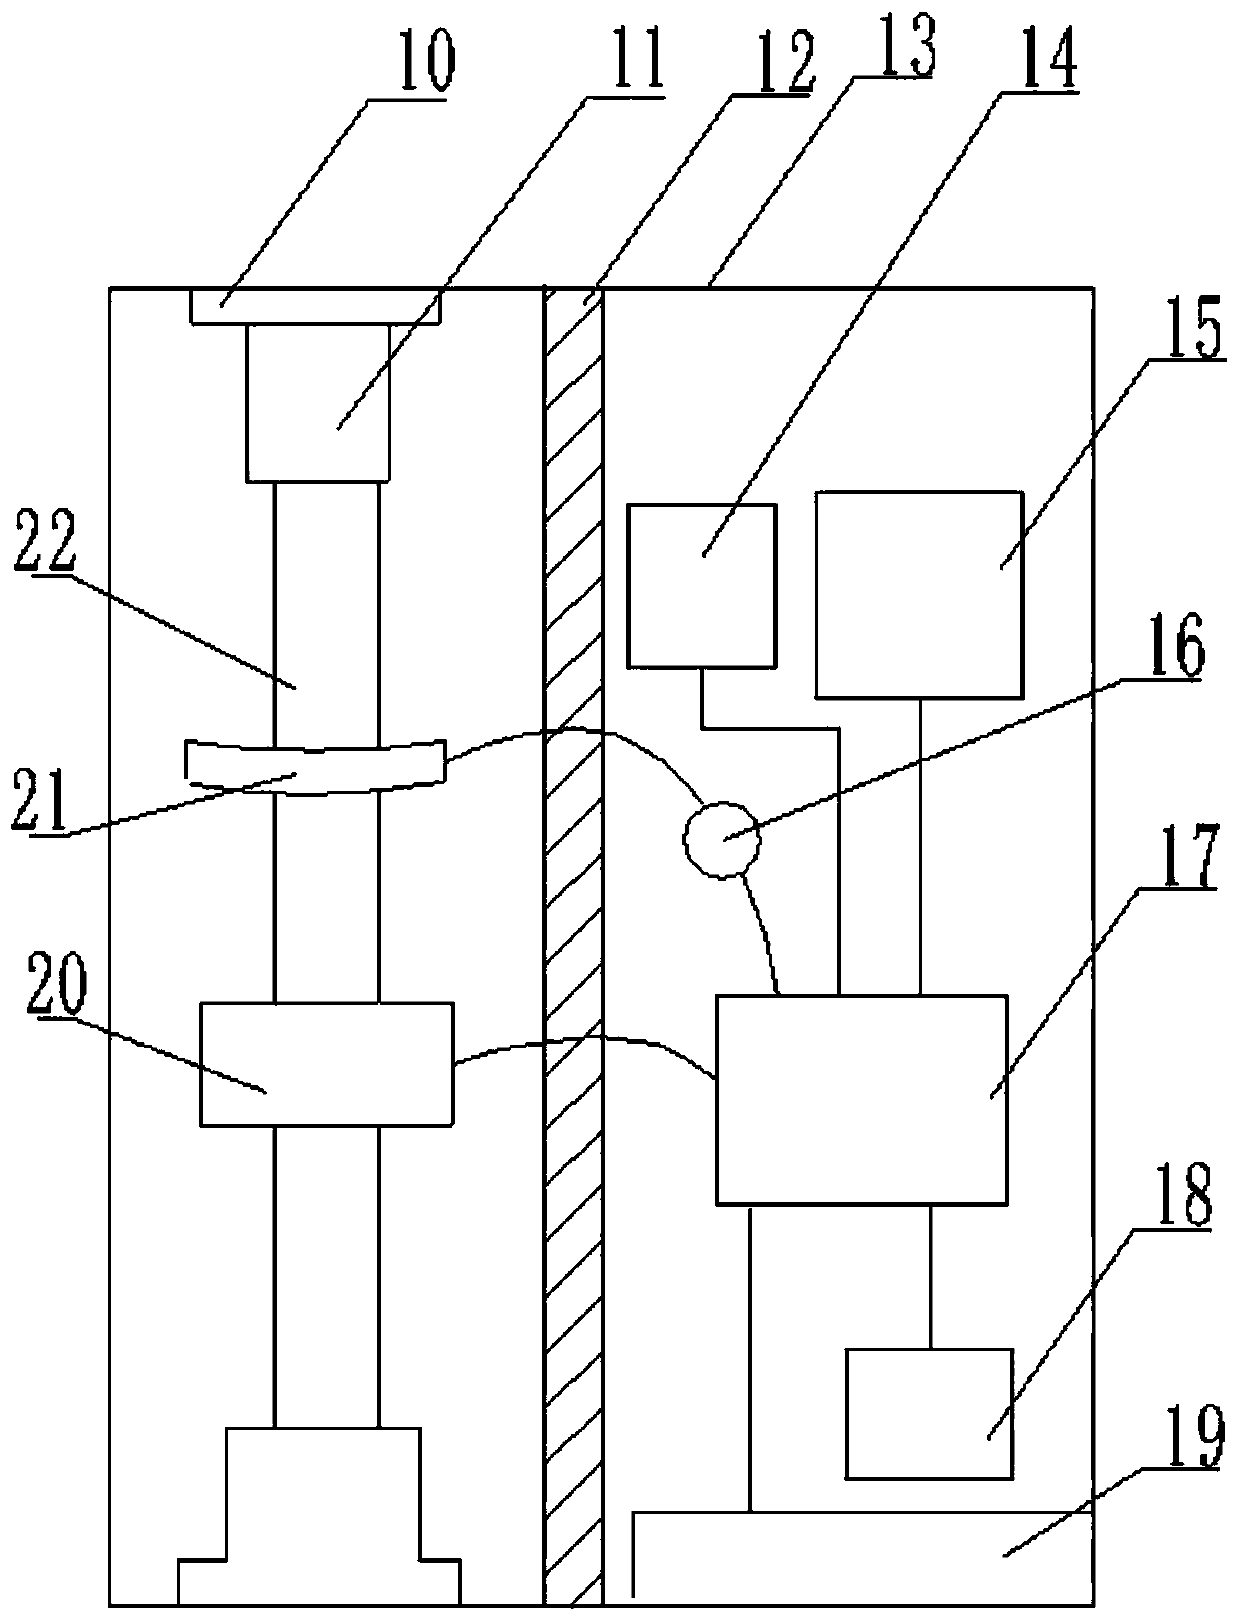 Power system information security monitoring device and monitoring method